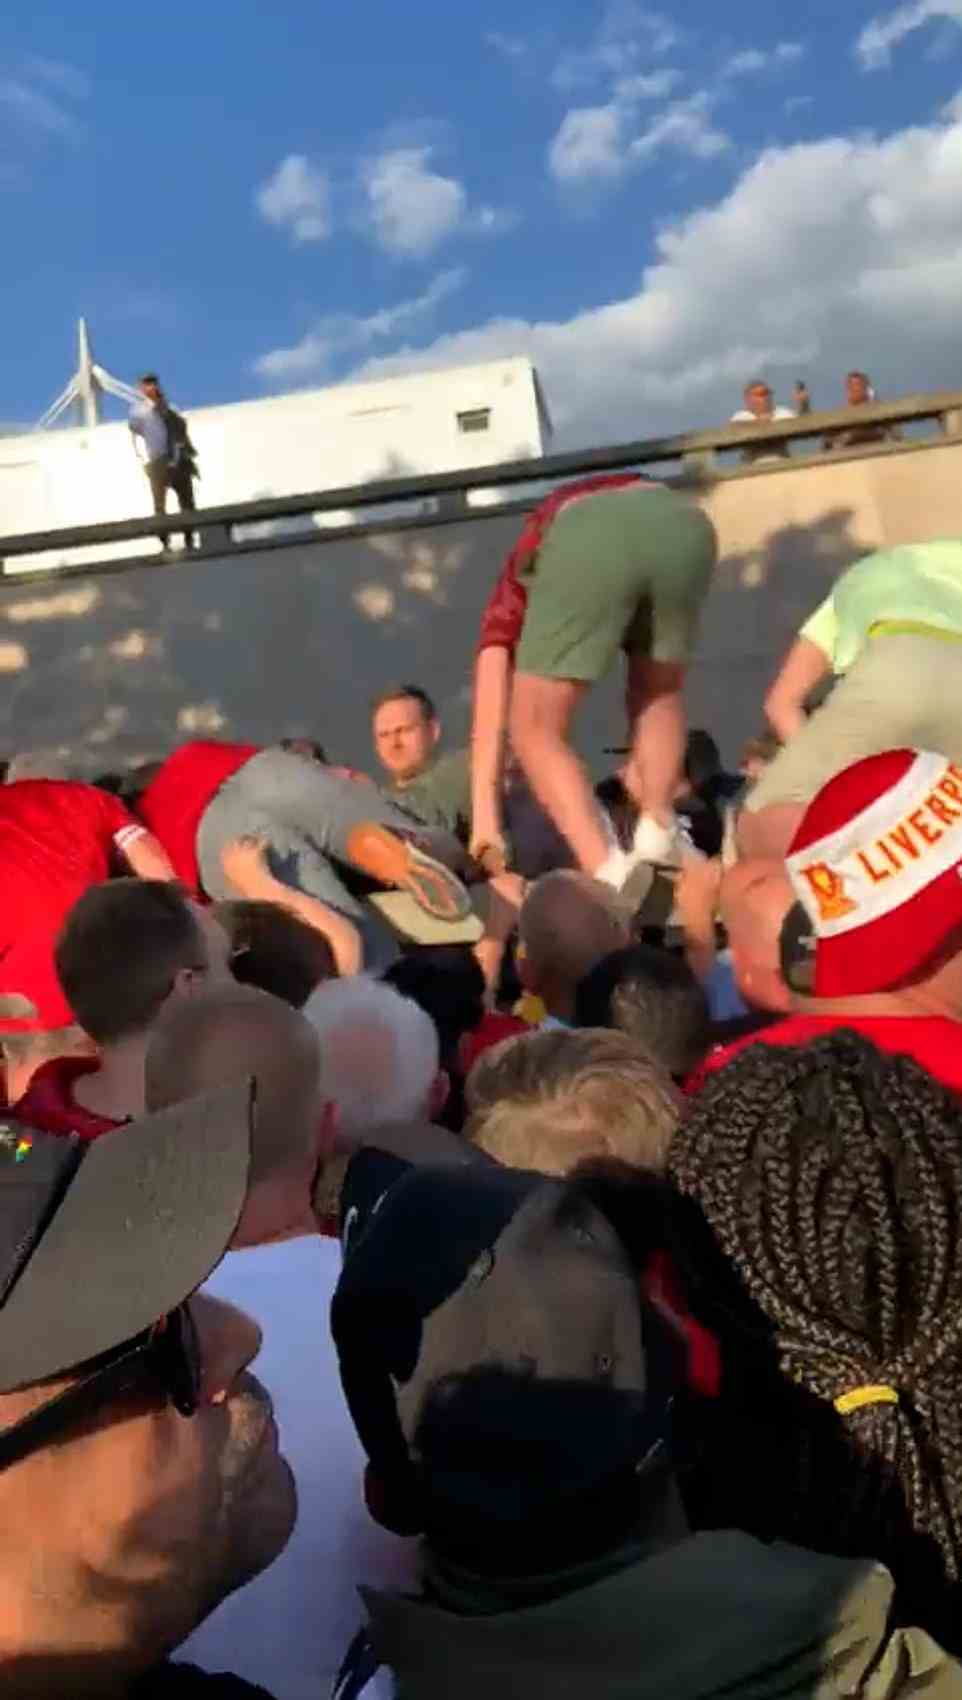 Other videos shared across social media showed the chaos outside the stadium, with Liverpool fans clambering over a wall